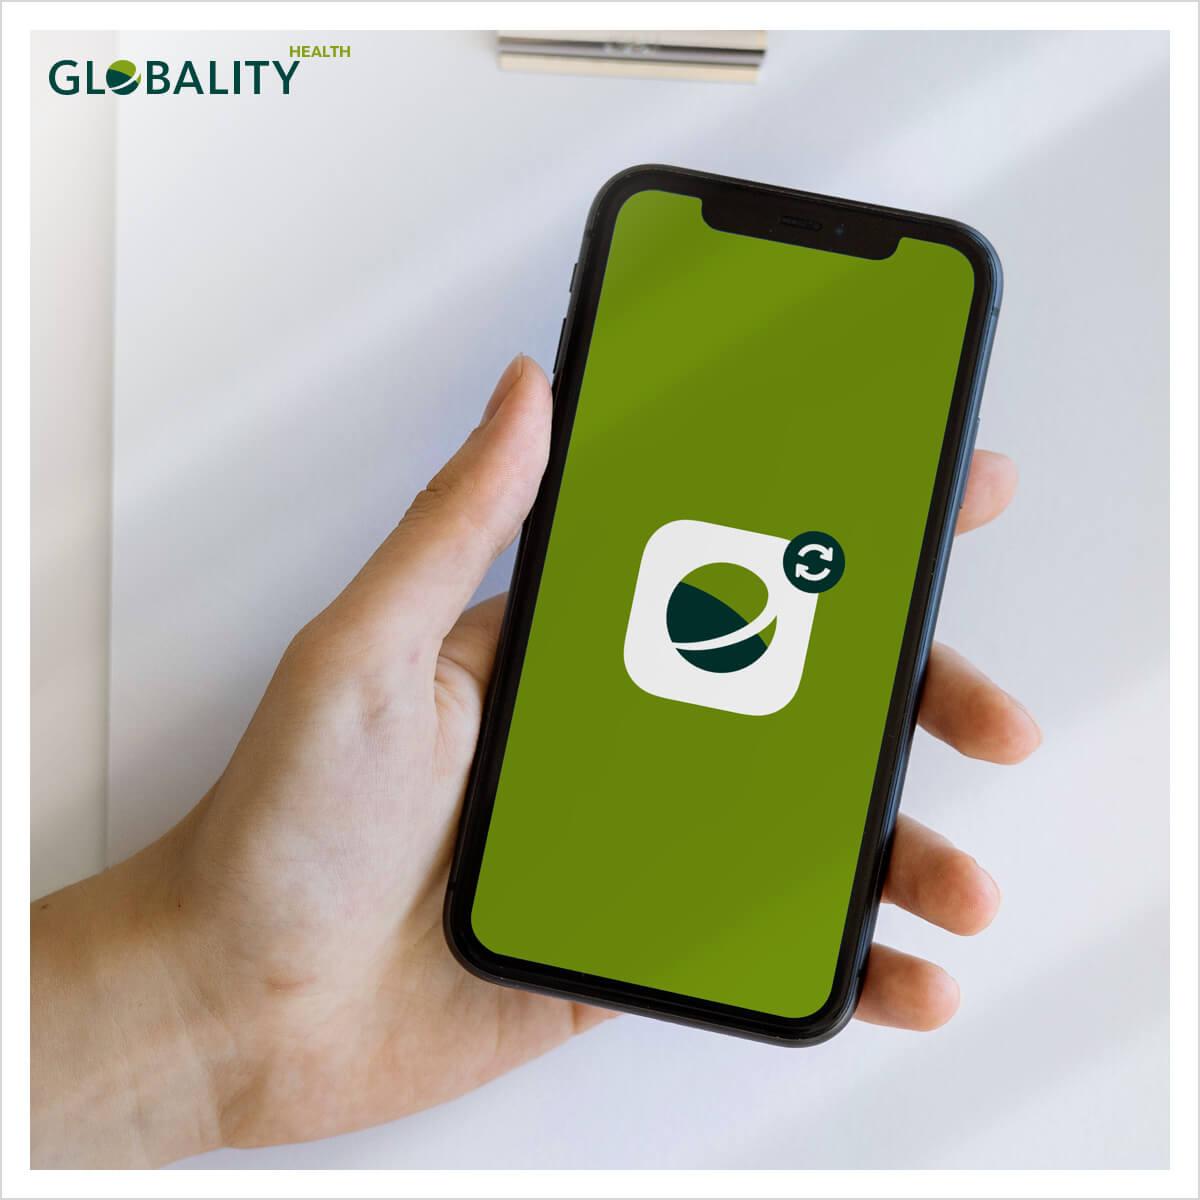 NEW - Digital insurance card in the MyGlobality app